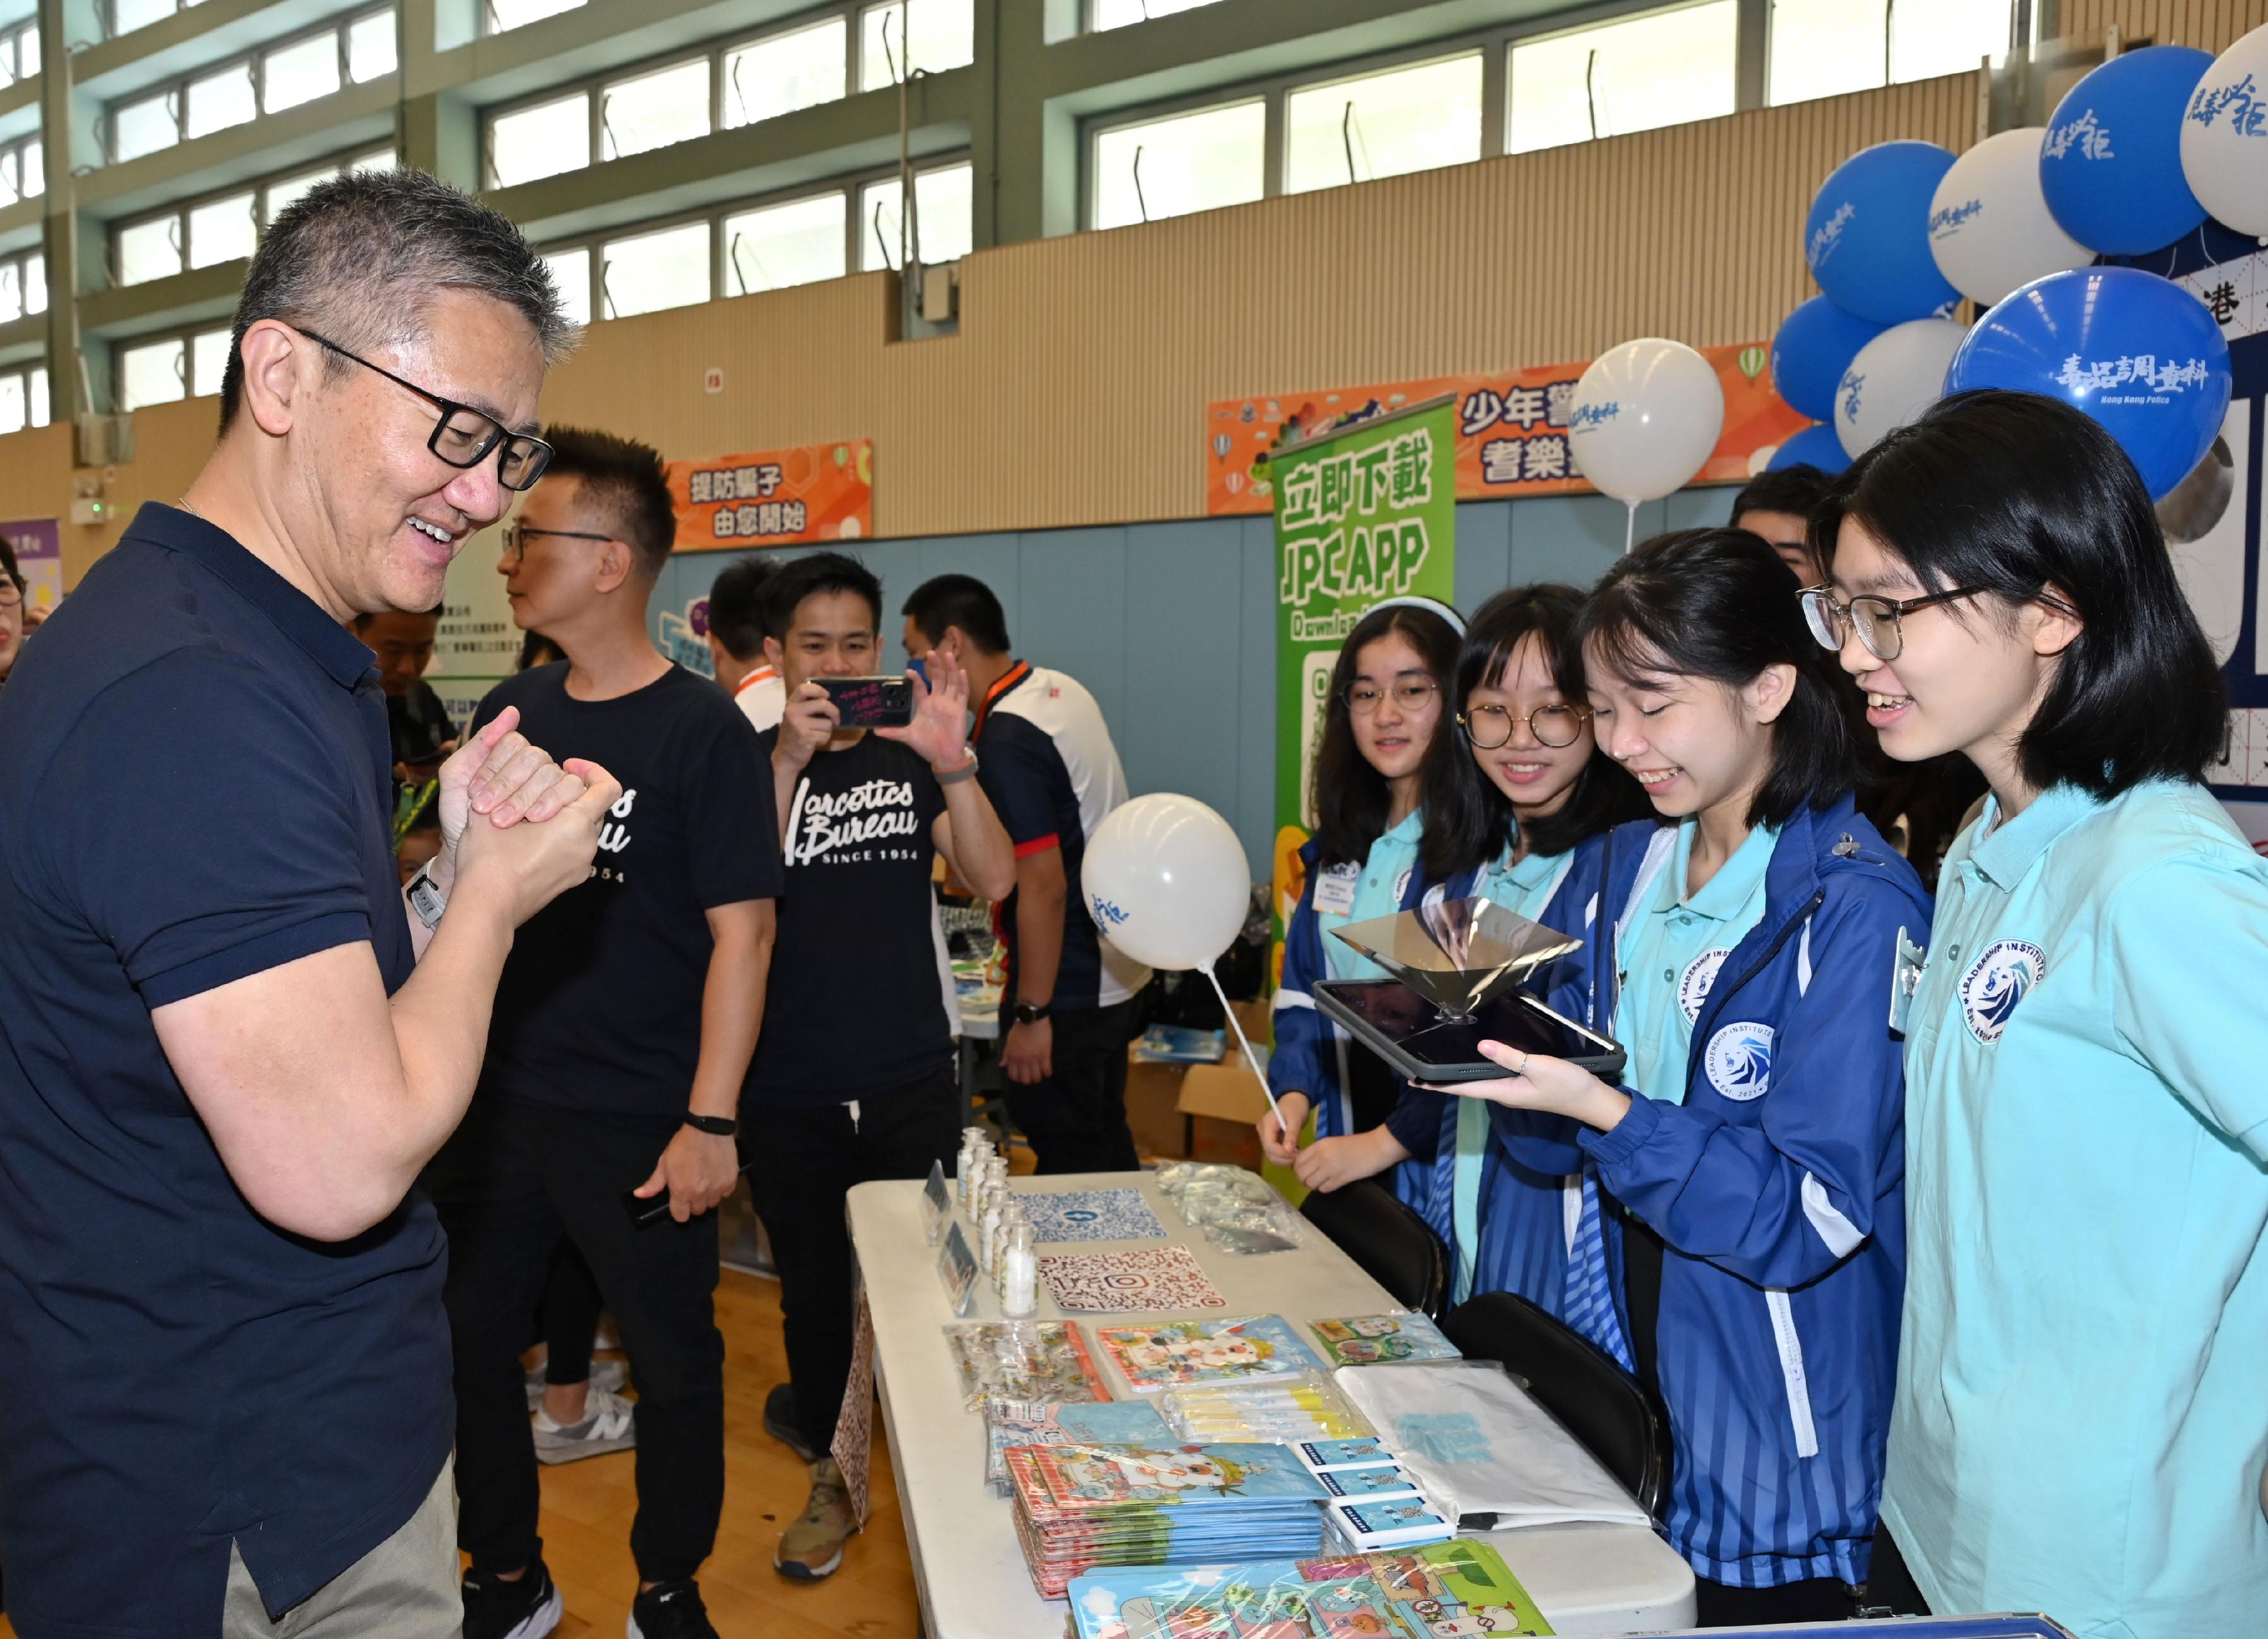 The Public Relations Wing of the Hong Kong Police Force organised the “JPC@PH Fun Day” at the Junior Police Call Permanent Activity Centre on April 22 and 23. The Commissioner of Police, Mr Siu Chak-yee (first left) touring a booth hosted by the Leadership Institute on Narcotics at the fun day.